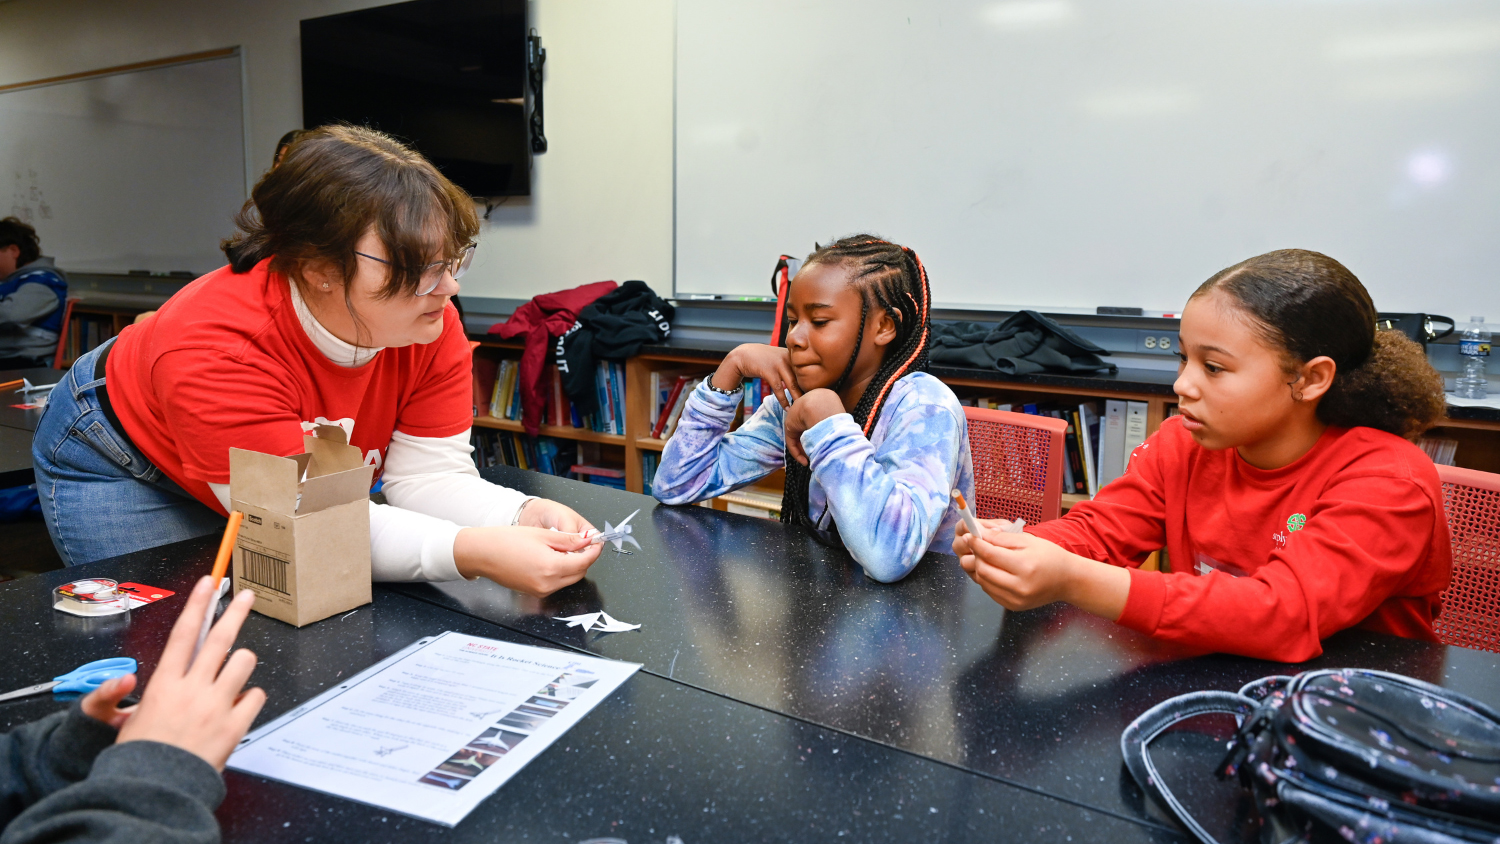 An NC State student, left, teaches two younger girls at a table.